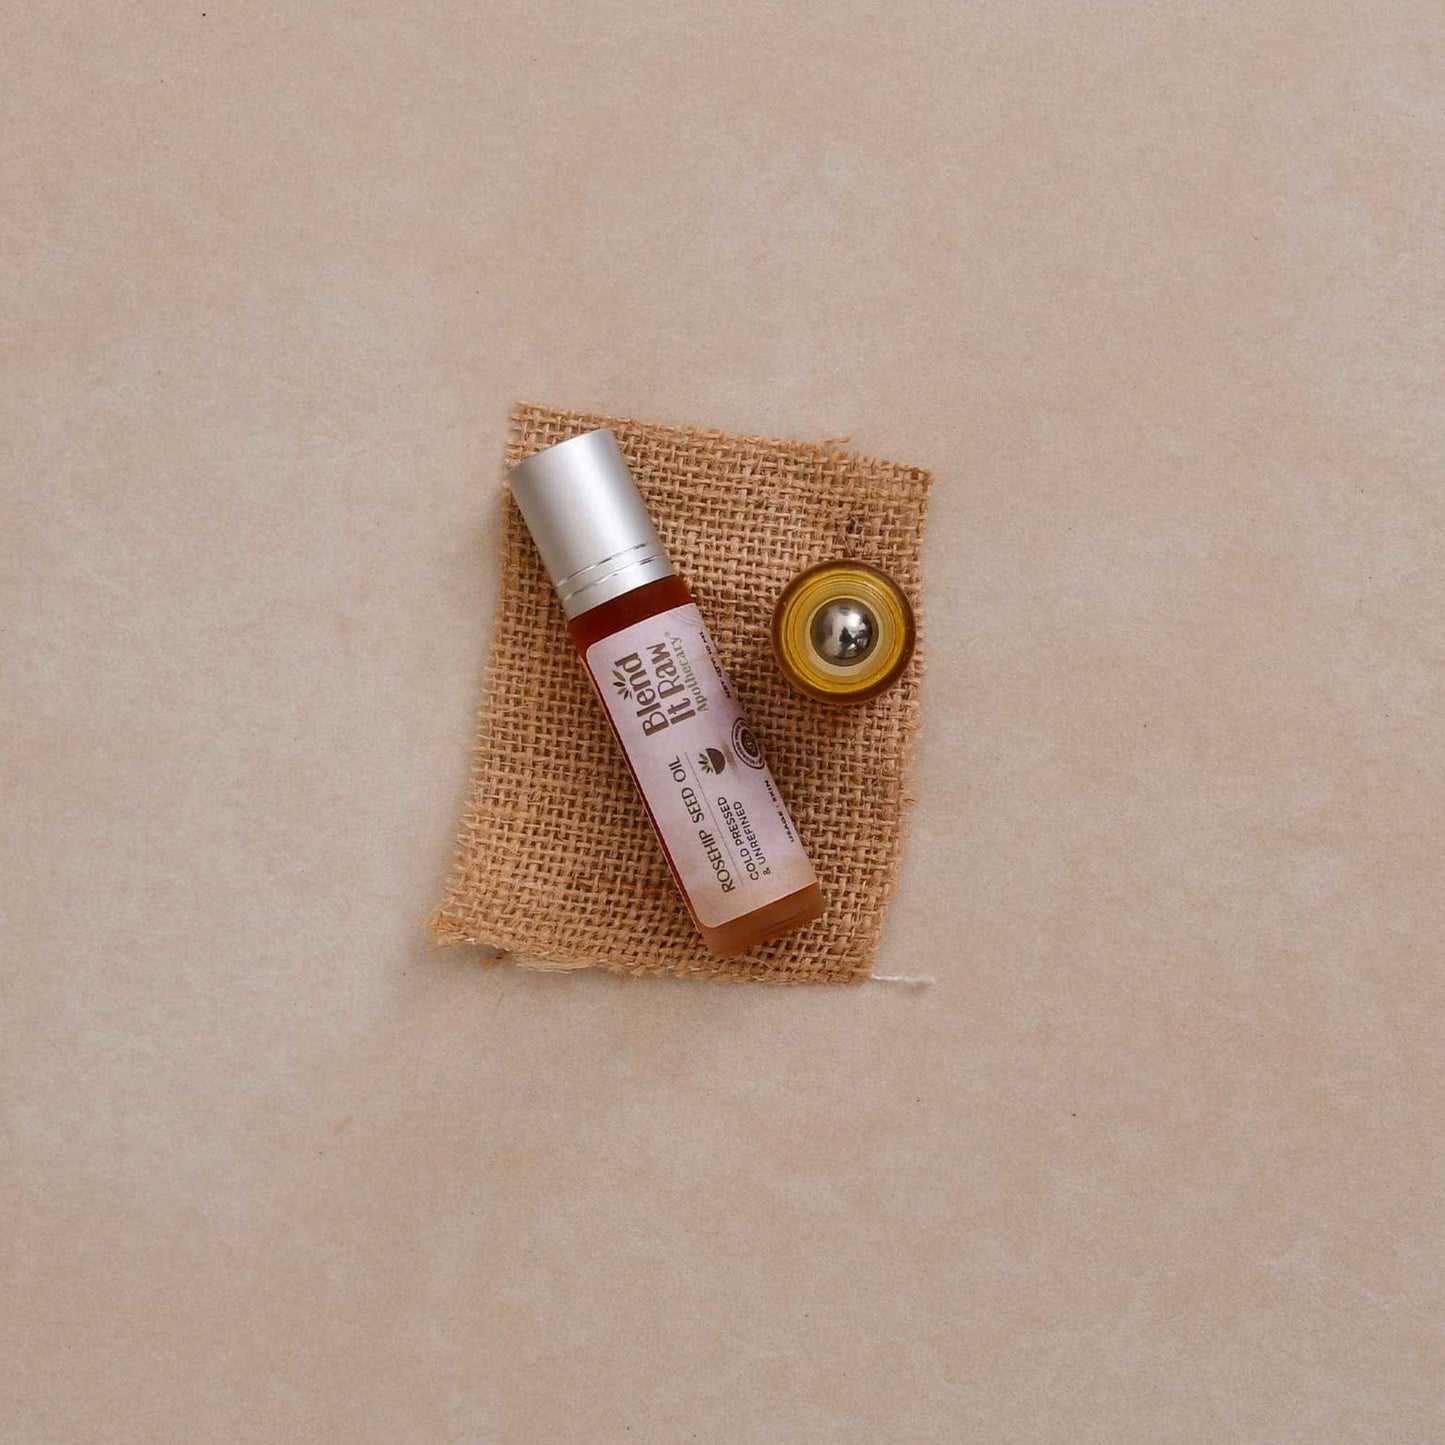 Rosehip oil roller bottle - Blend It Raw Apothecary